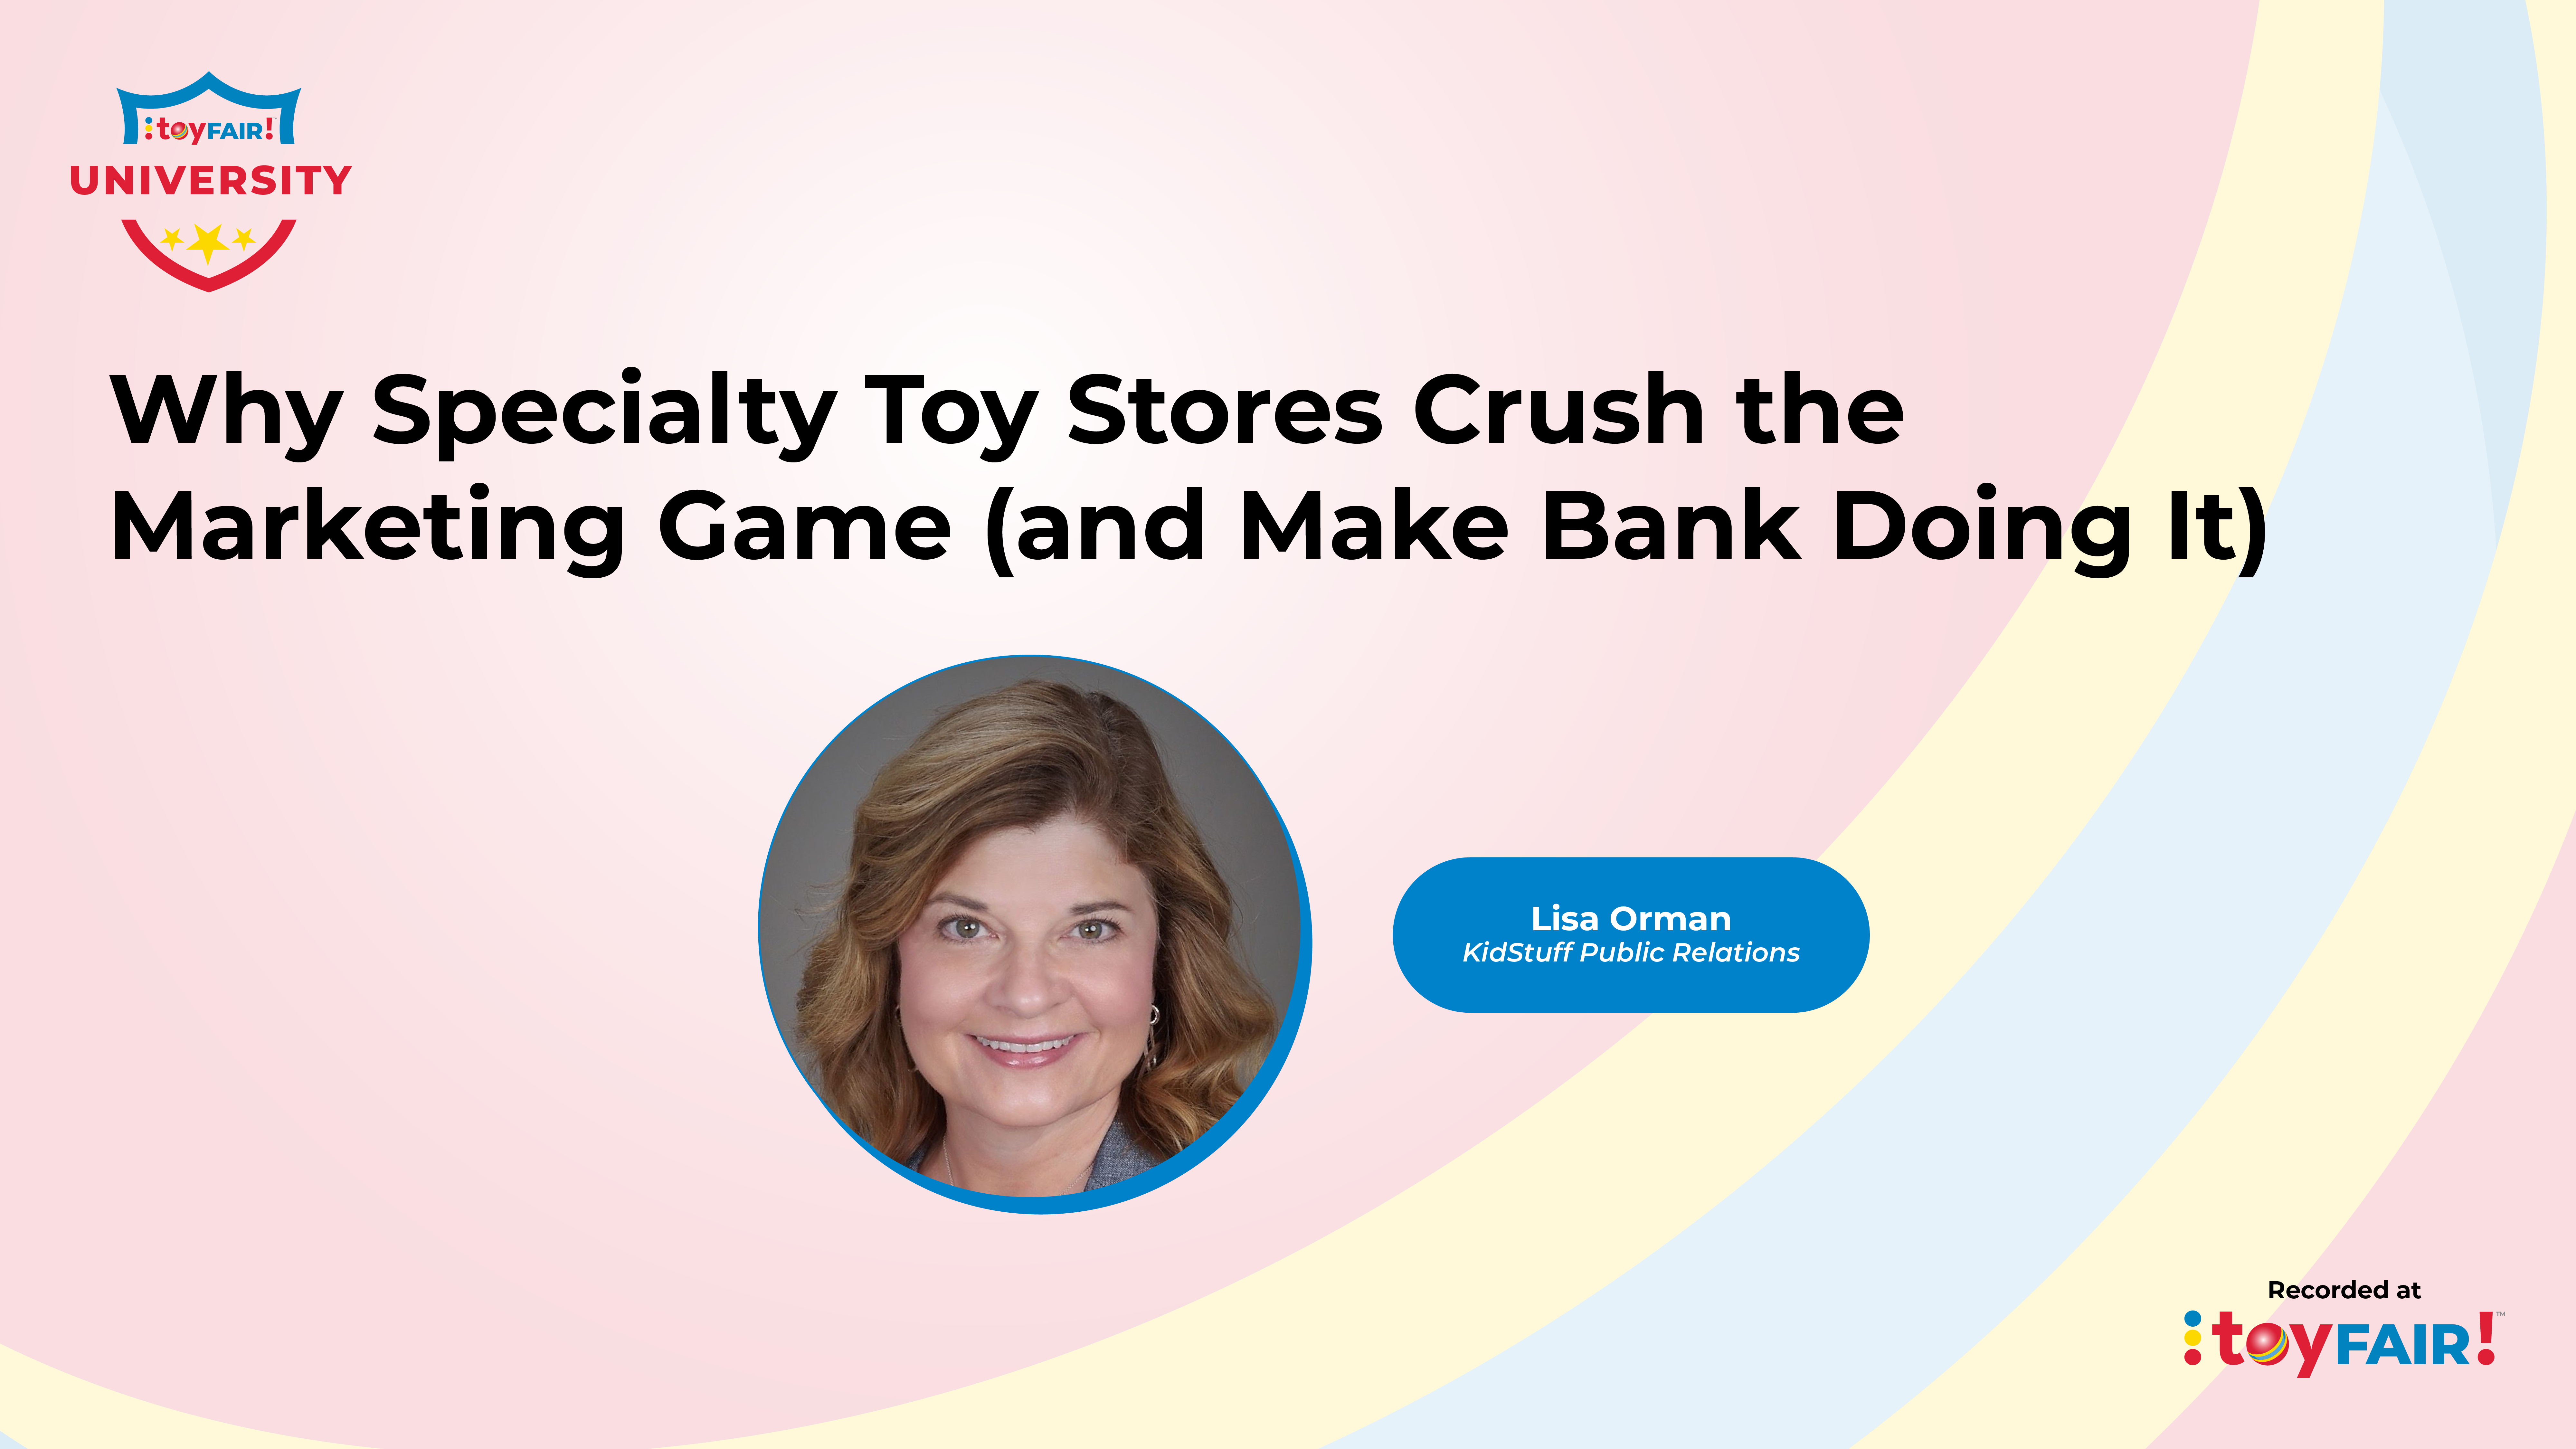 Why Specialty Toy Stores Crush the Marketing Game (and Make Bank Doing It)